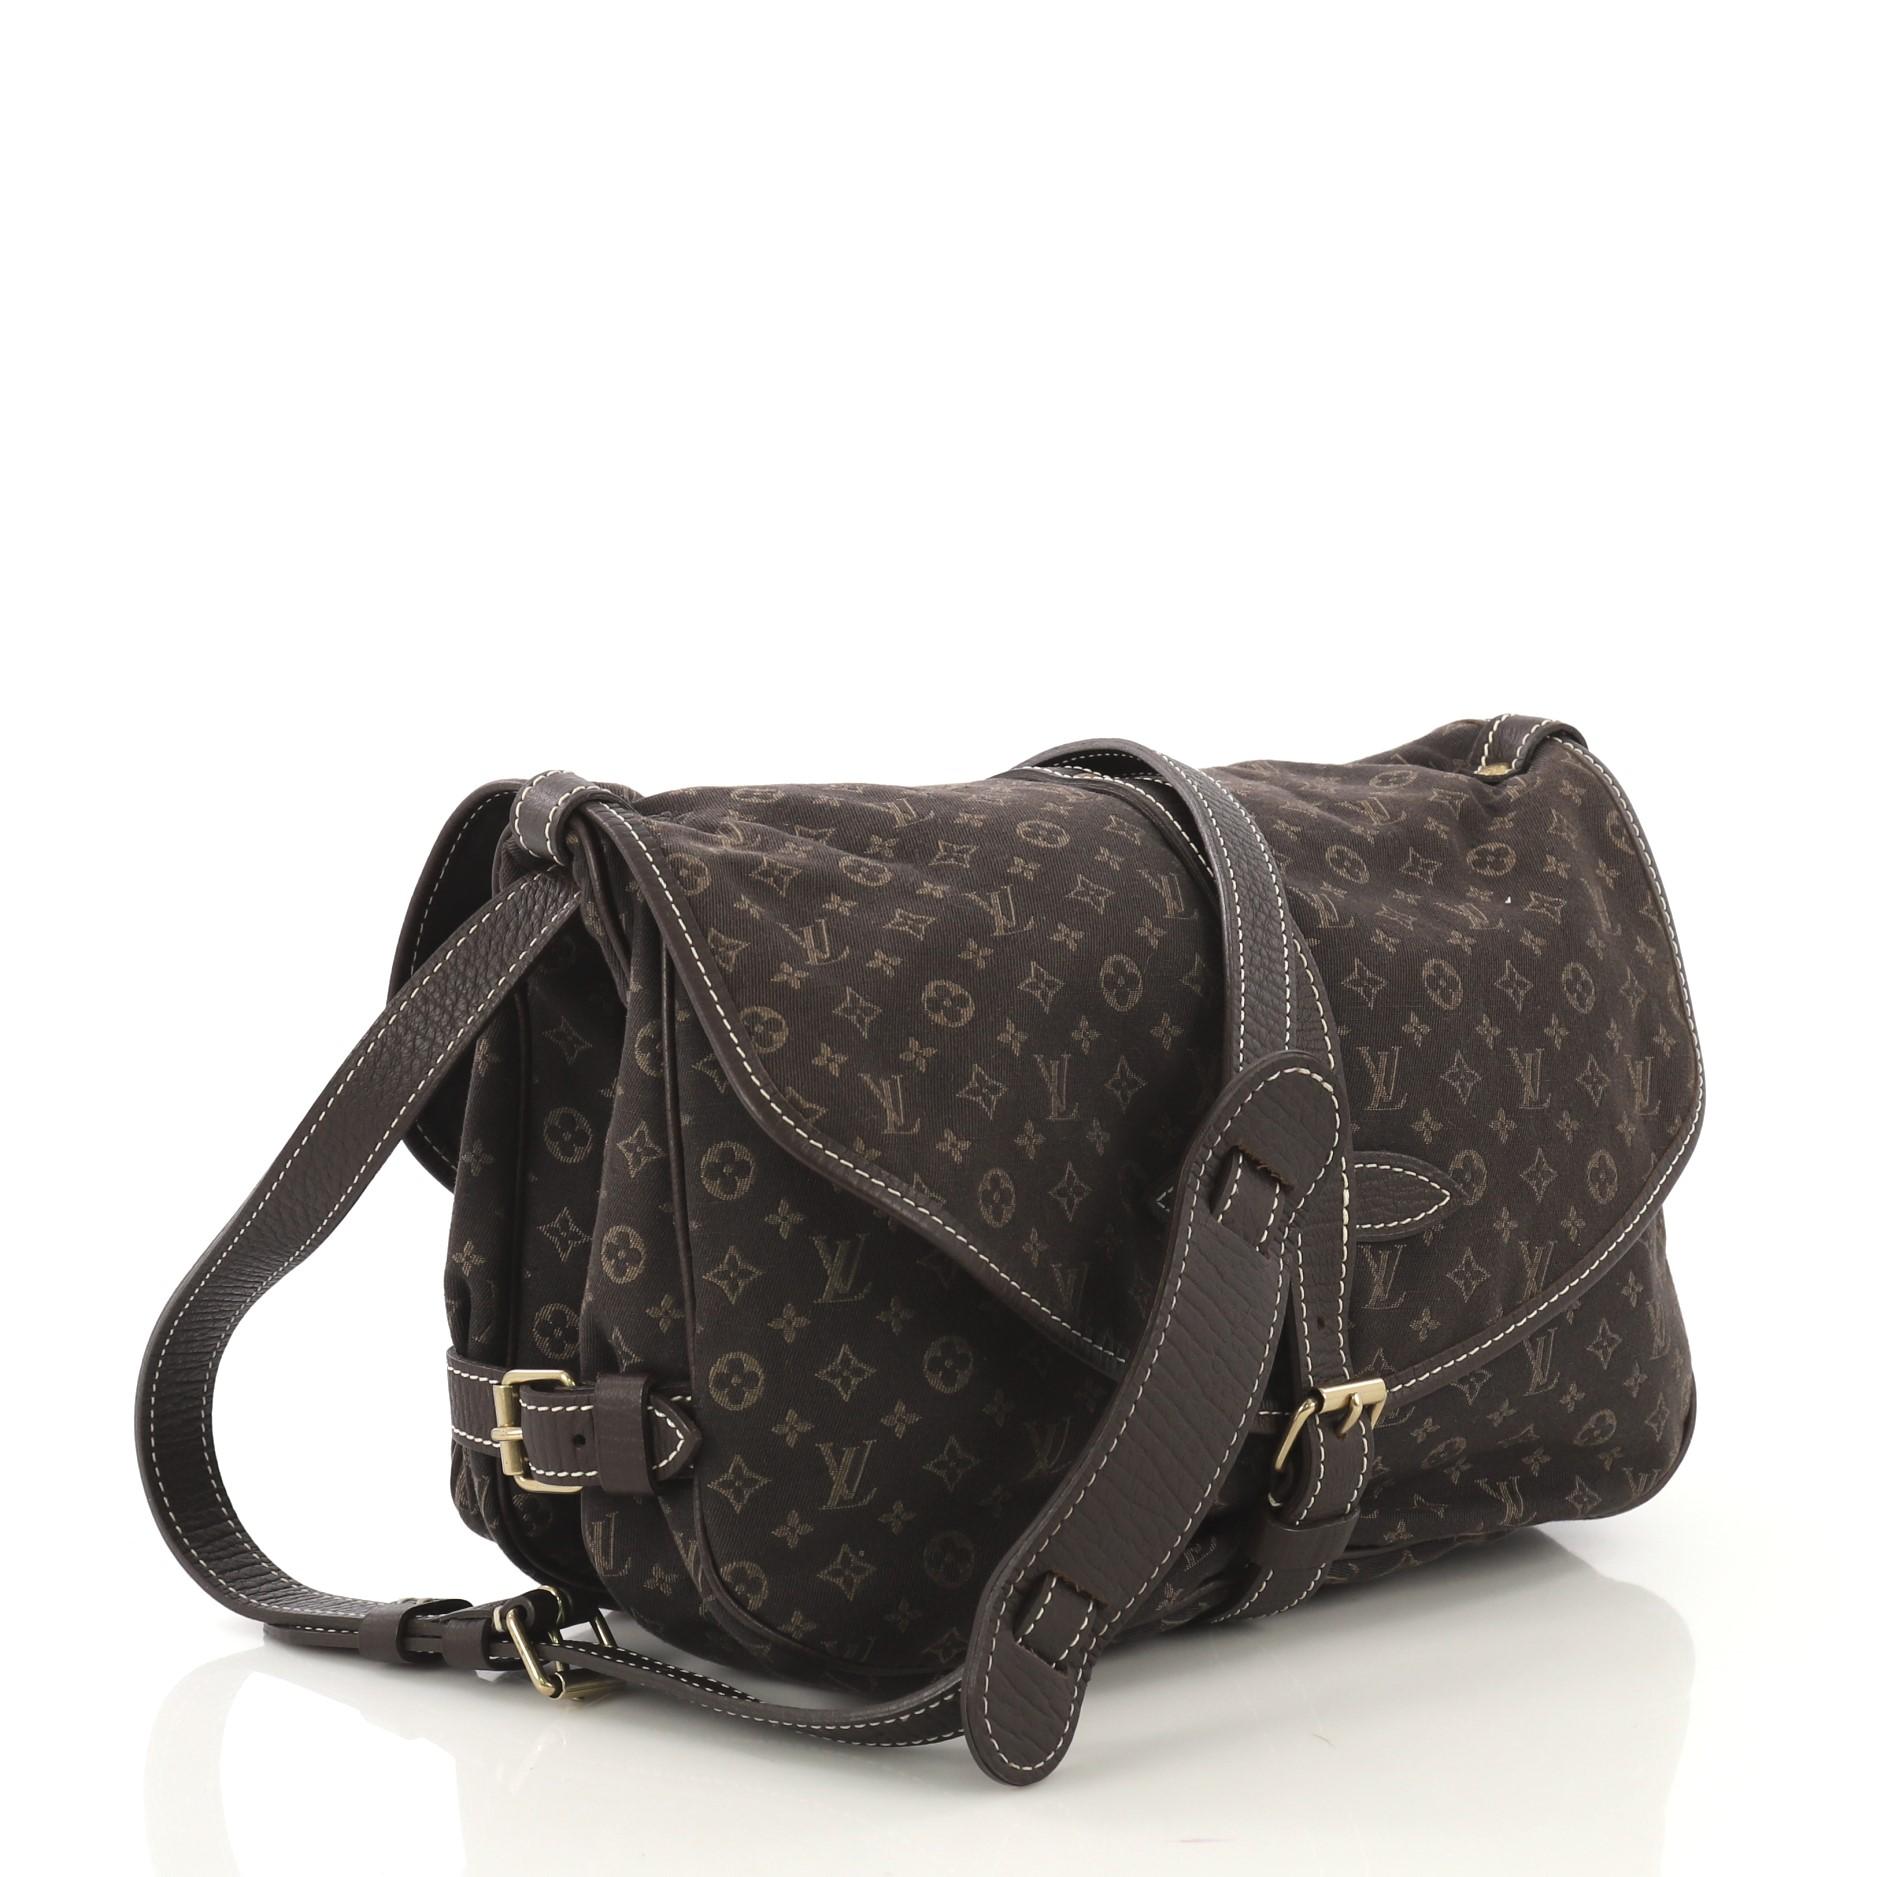 This Louis Vuitton Saumur Handbag Mini Lin, crafted in brown mini lin monogram canvas, features an adjustable leather crossbody strap, leather trim, and gold-tone hardware. Its buckle closure opens to brown fabric interior with slip compartments.